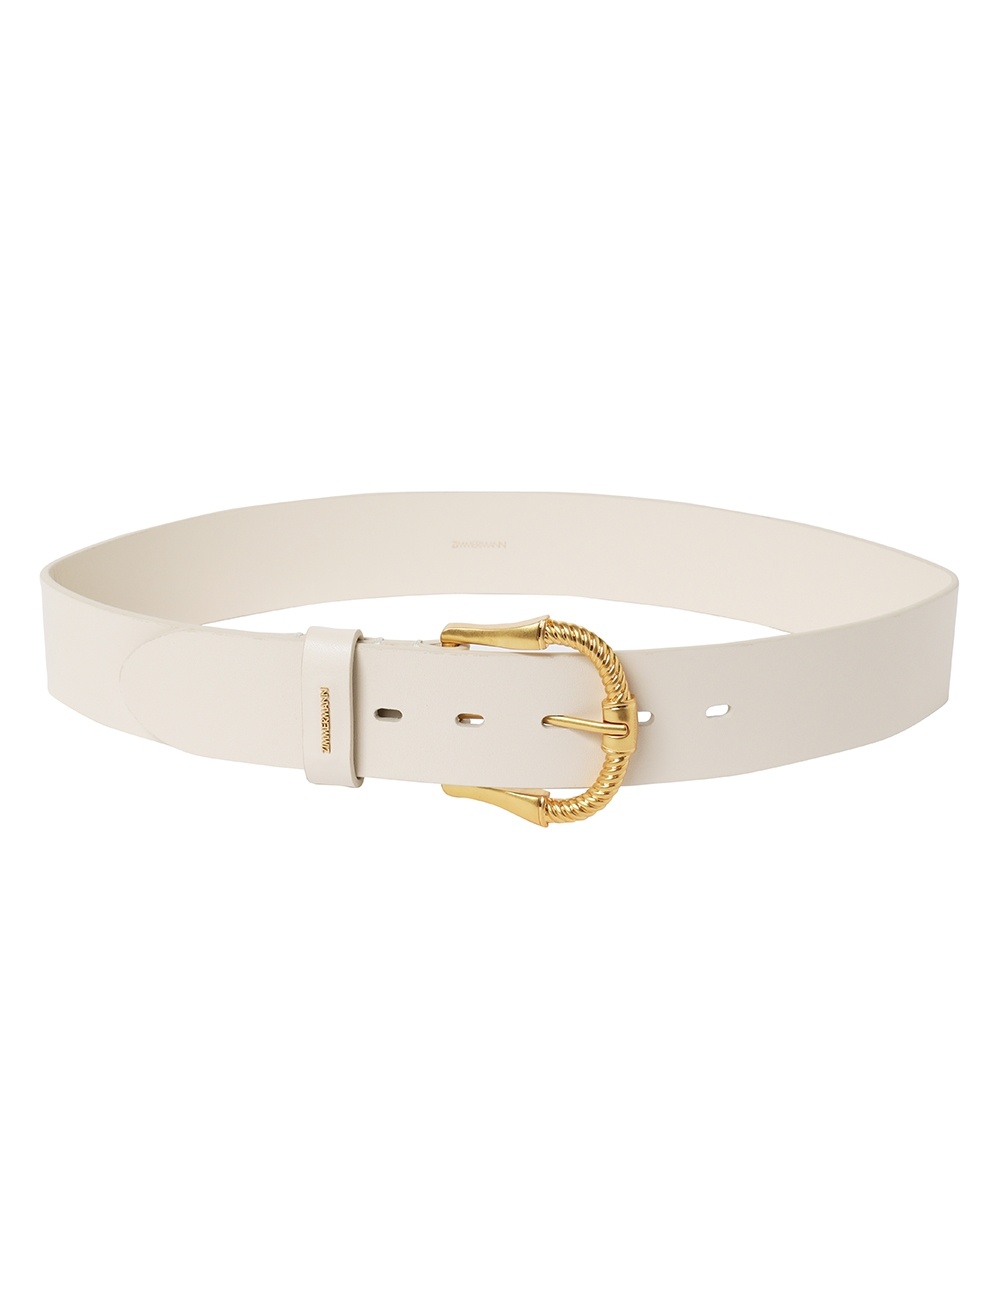 TWISTED BUCKLE LEATHER BELT 40 - 1